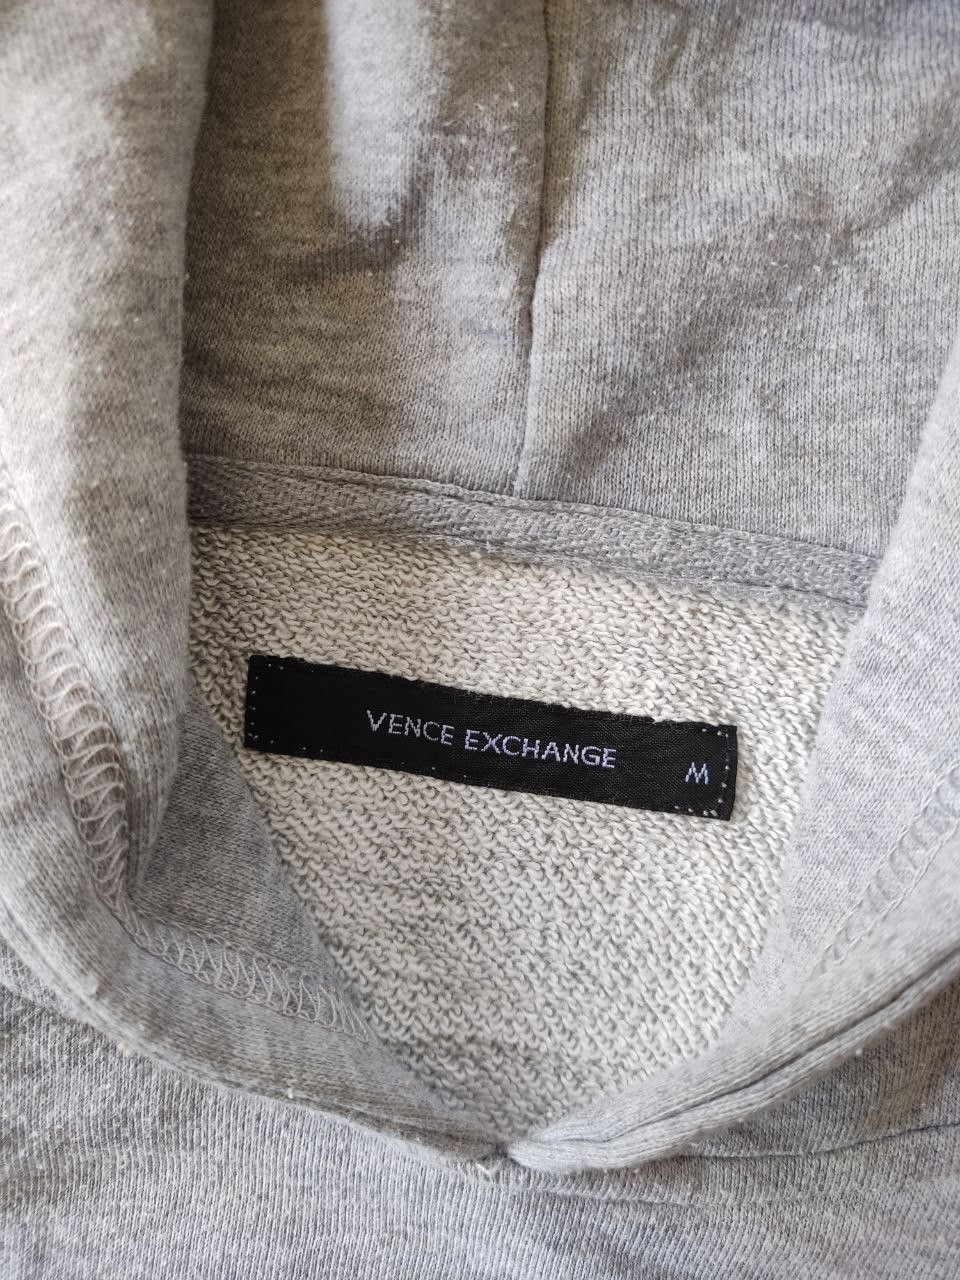 Vince - Vence Exchange New York City Beat by Selfish Pullover Hoodie - 6